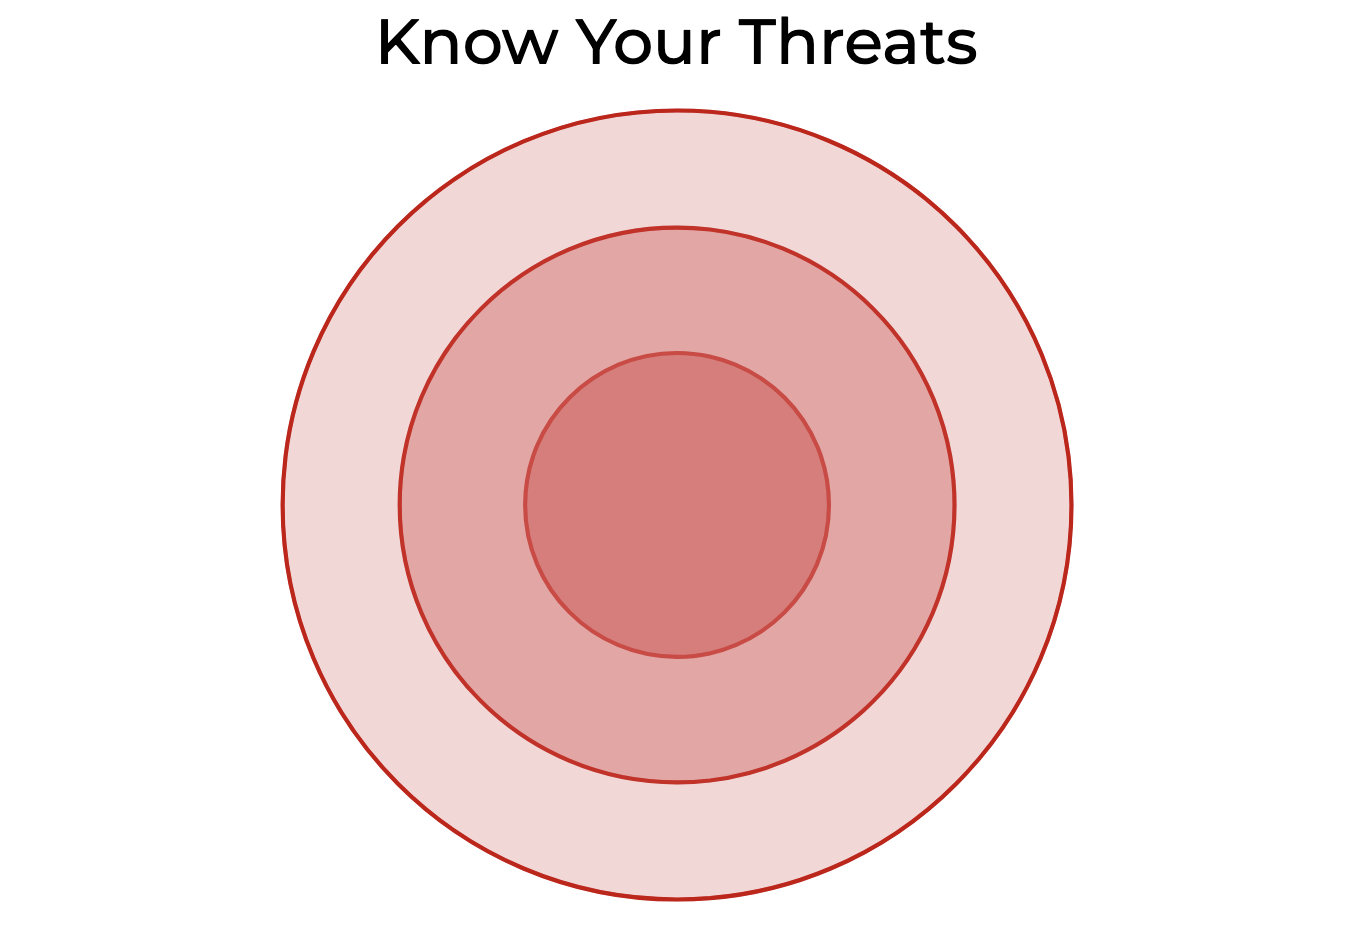 Control Validation Compass Threat Modeling